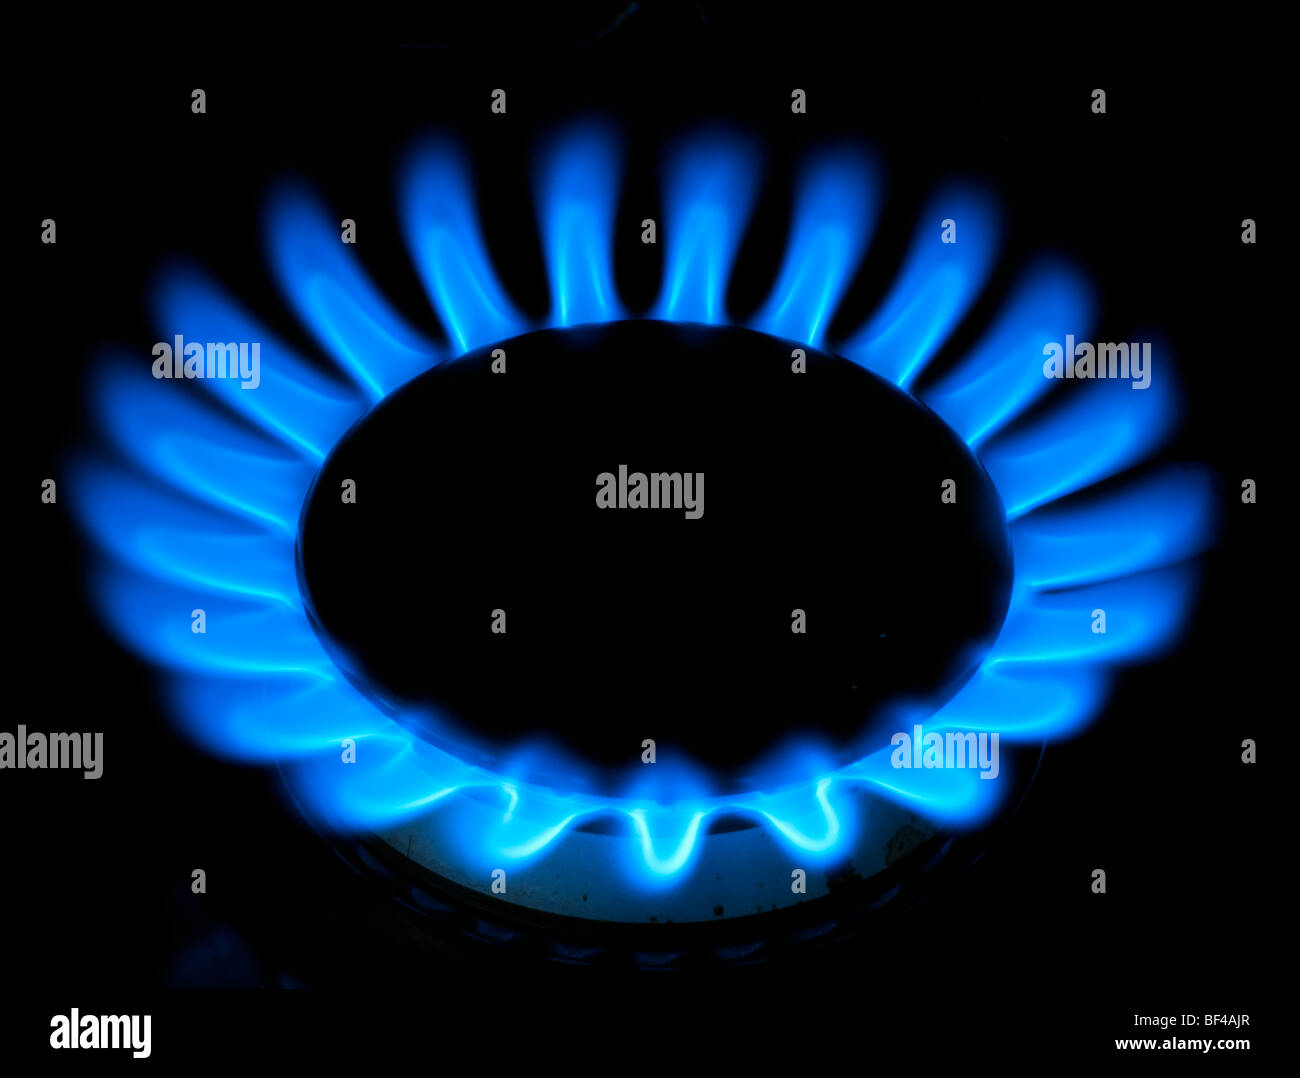 blue flames of gas stove on black background, some parts of stove are visible Stock Photo